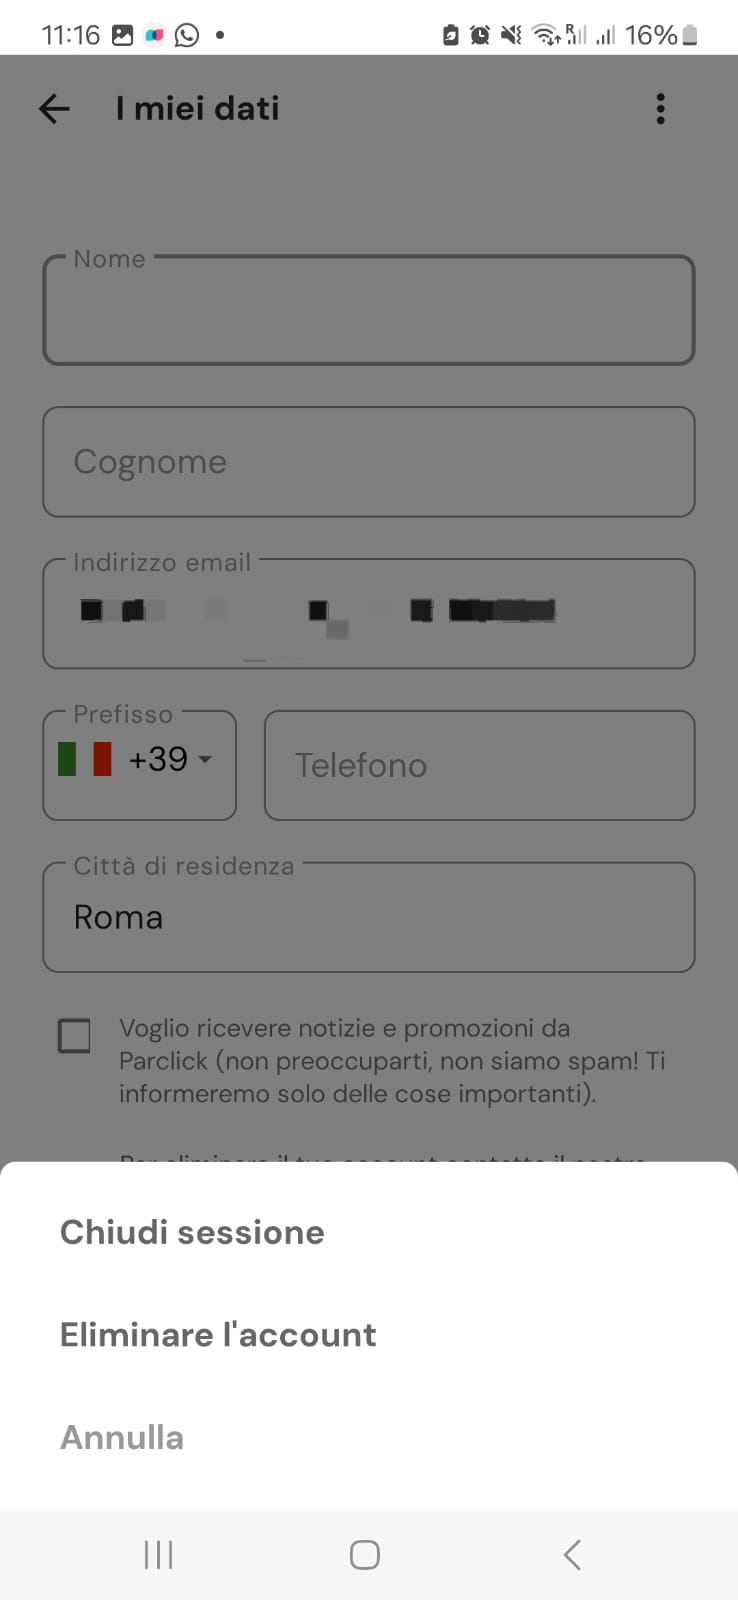 CHIUDERE-SESSIONE-ACCOUNT-PARCLICK-APP.jpeg